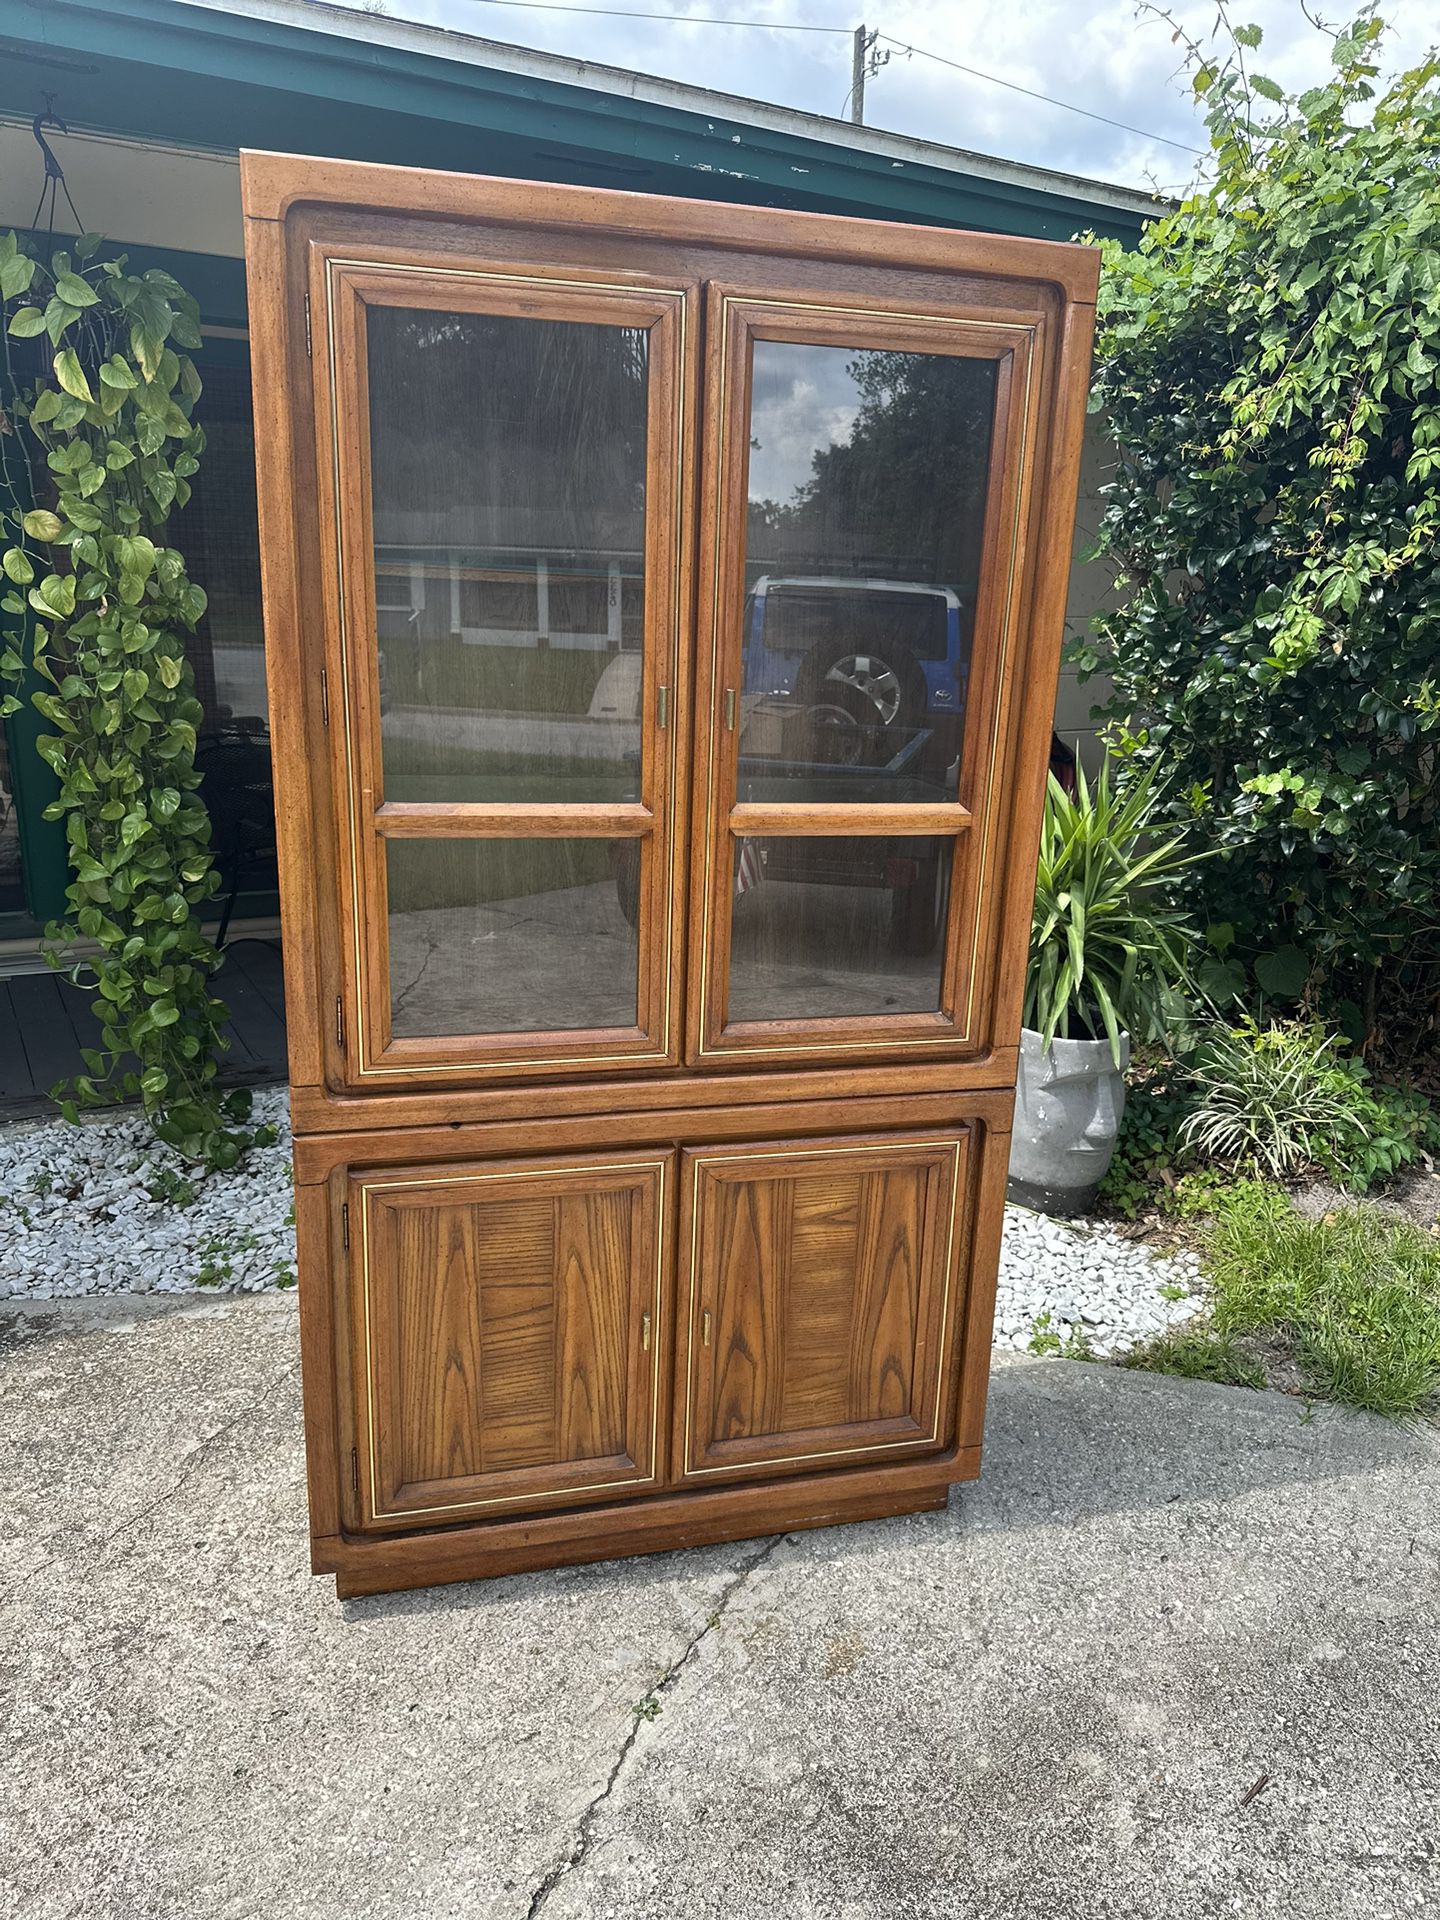 China Hutch Cabinet With Light 